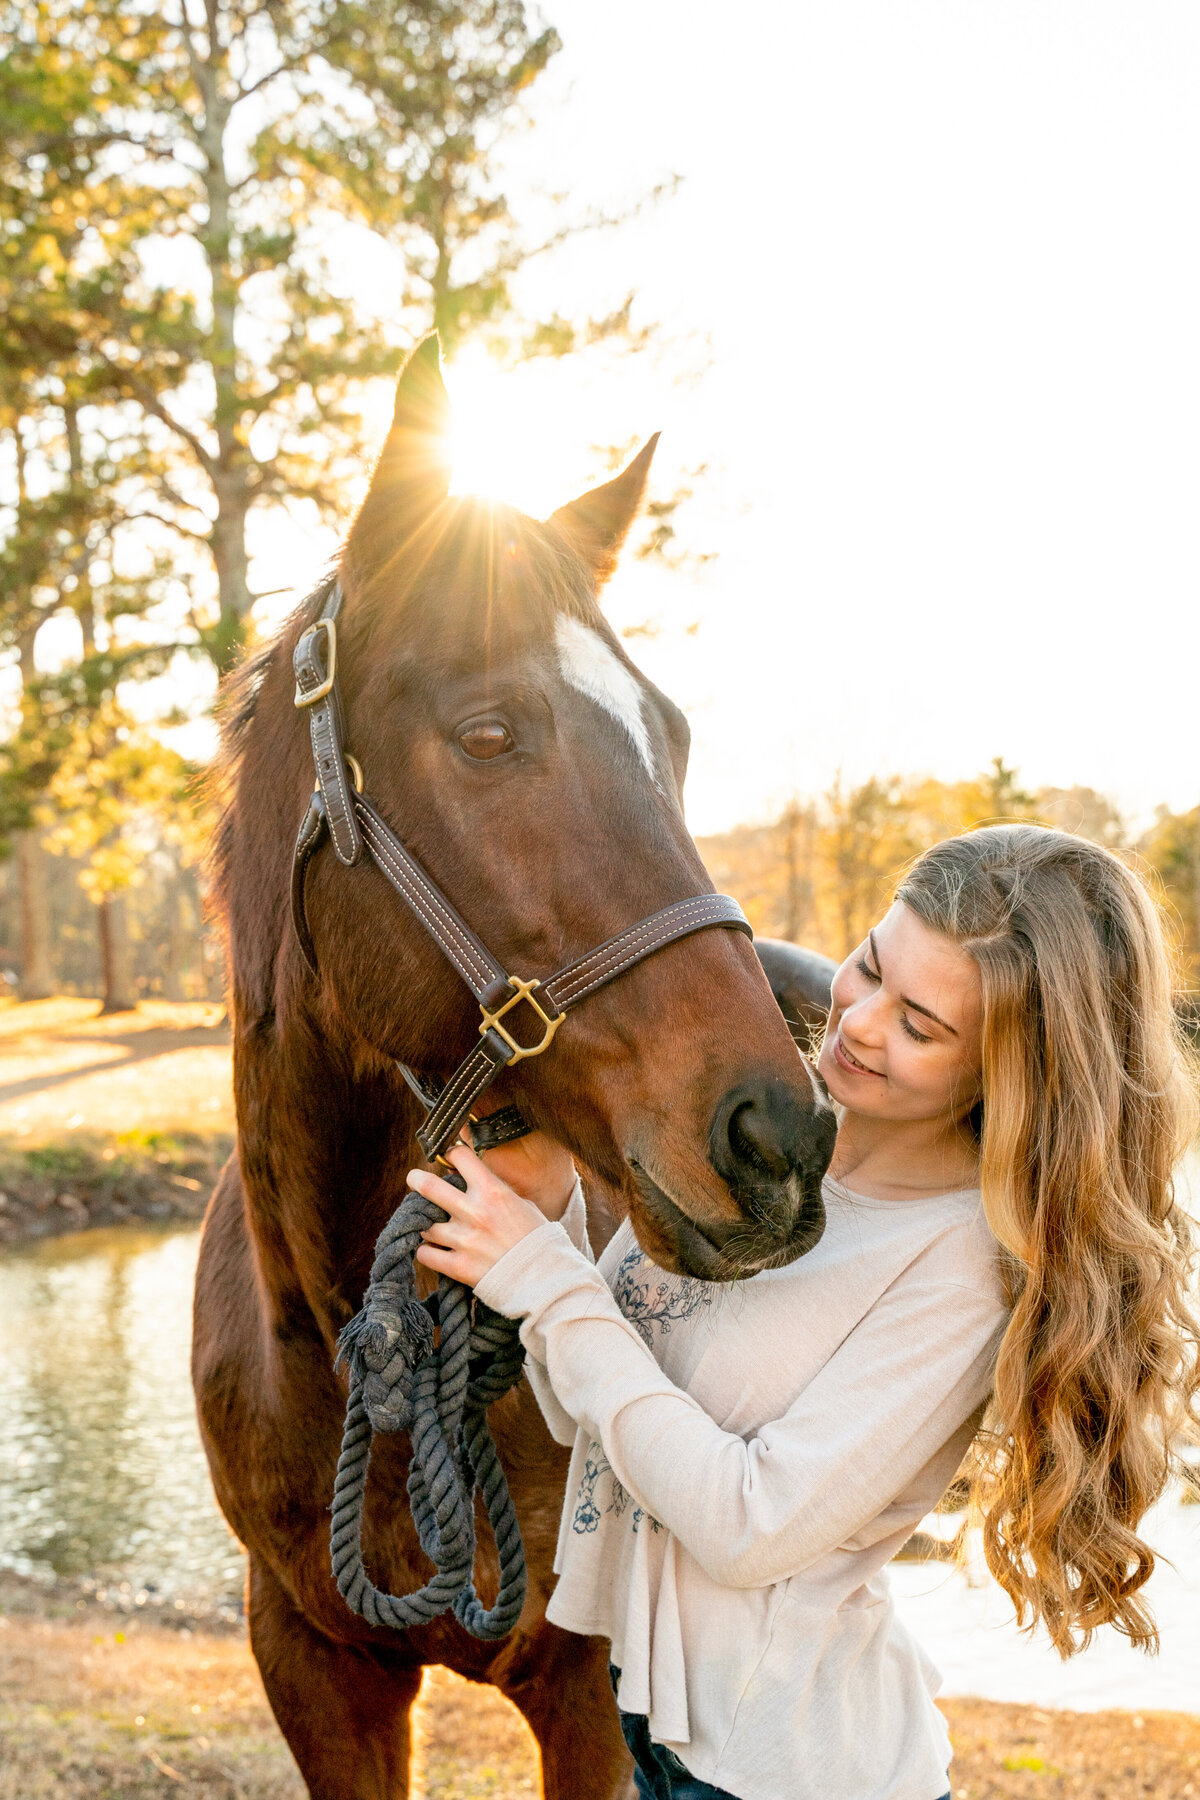 Lookout Mountain Senior Photographer Kelley Hoagland  takes portrait of teenager posed with horse during on-site photo shoot.